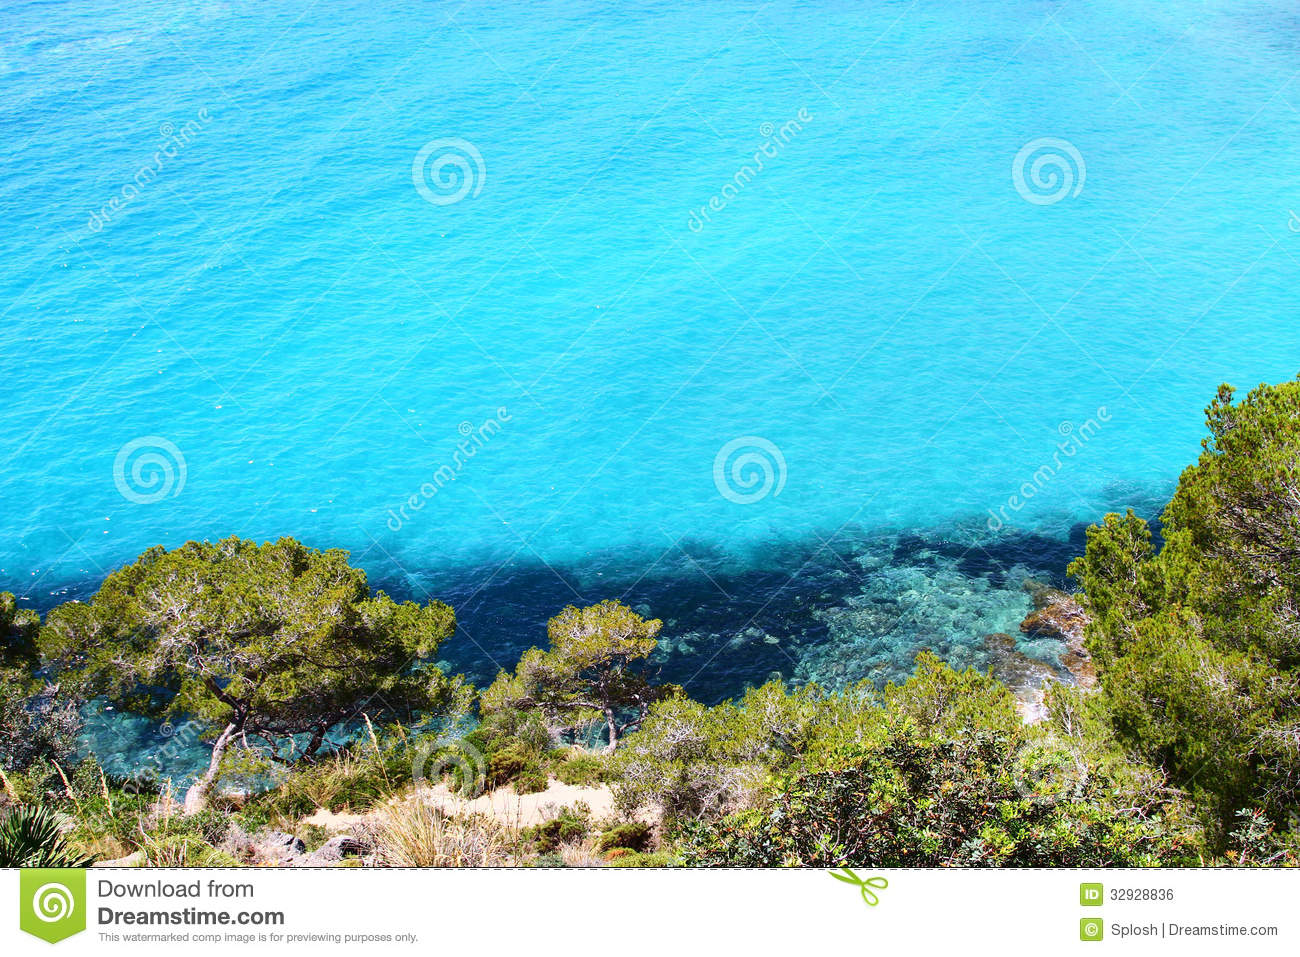 Island Cliffs And Turquoise Sea Water Royalty Free Stock Image   Image